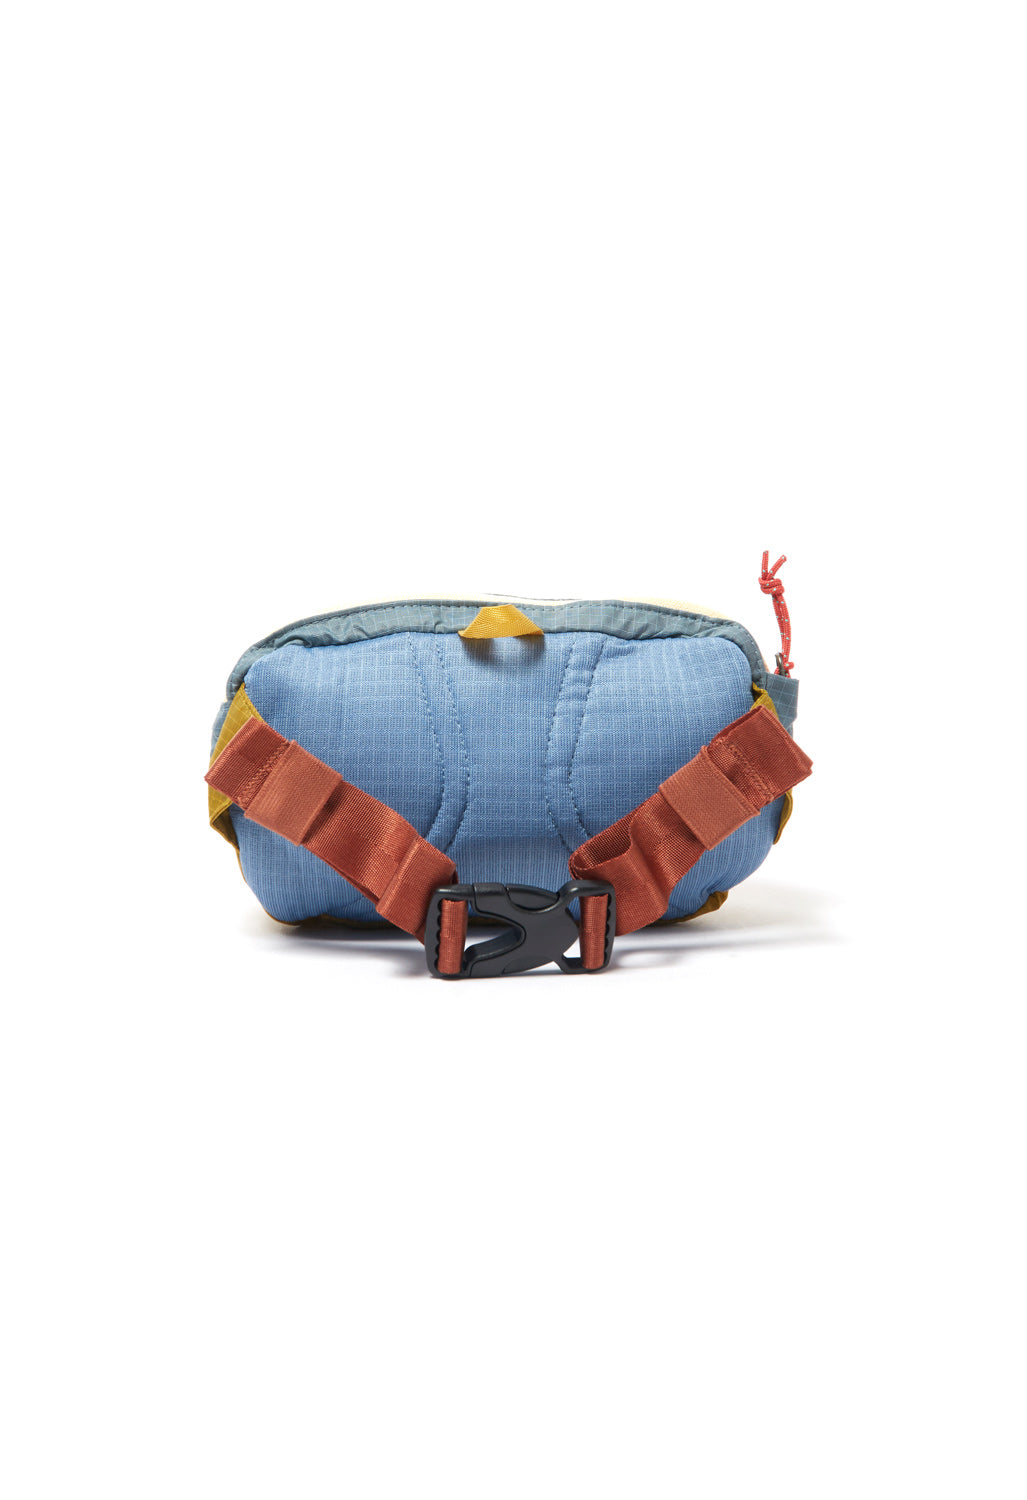 Patagonia Ultralight Black Hole Mini Hip Pack - Patchwork/Cabin Gold